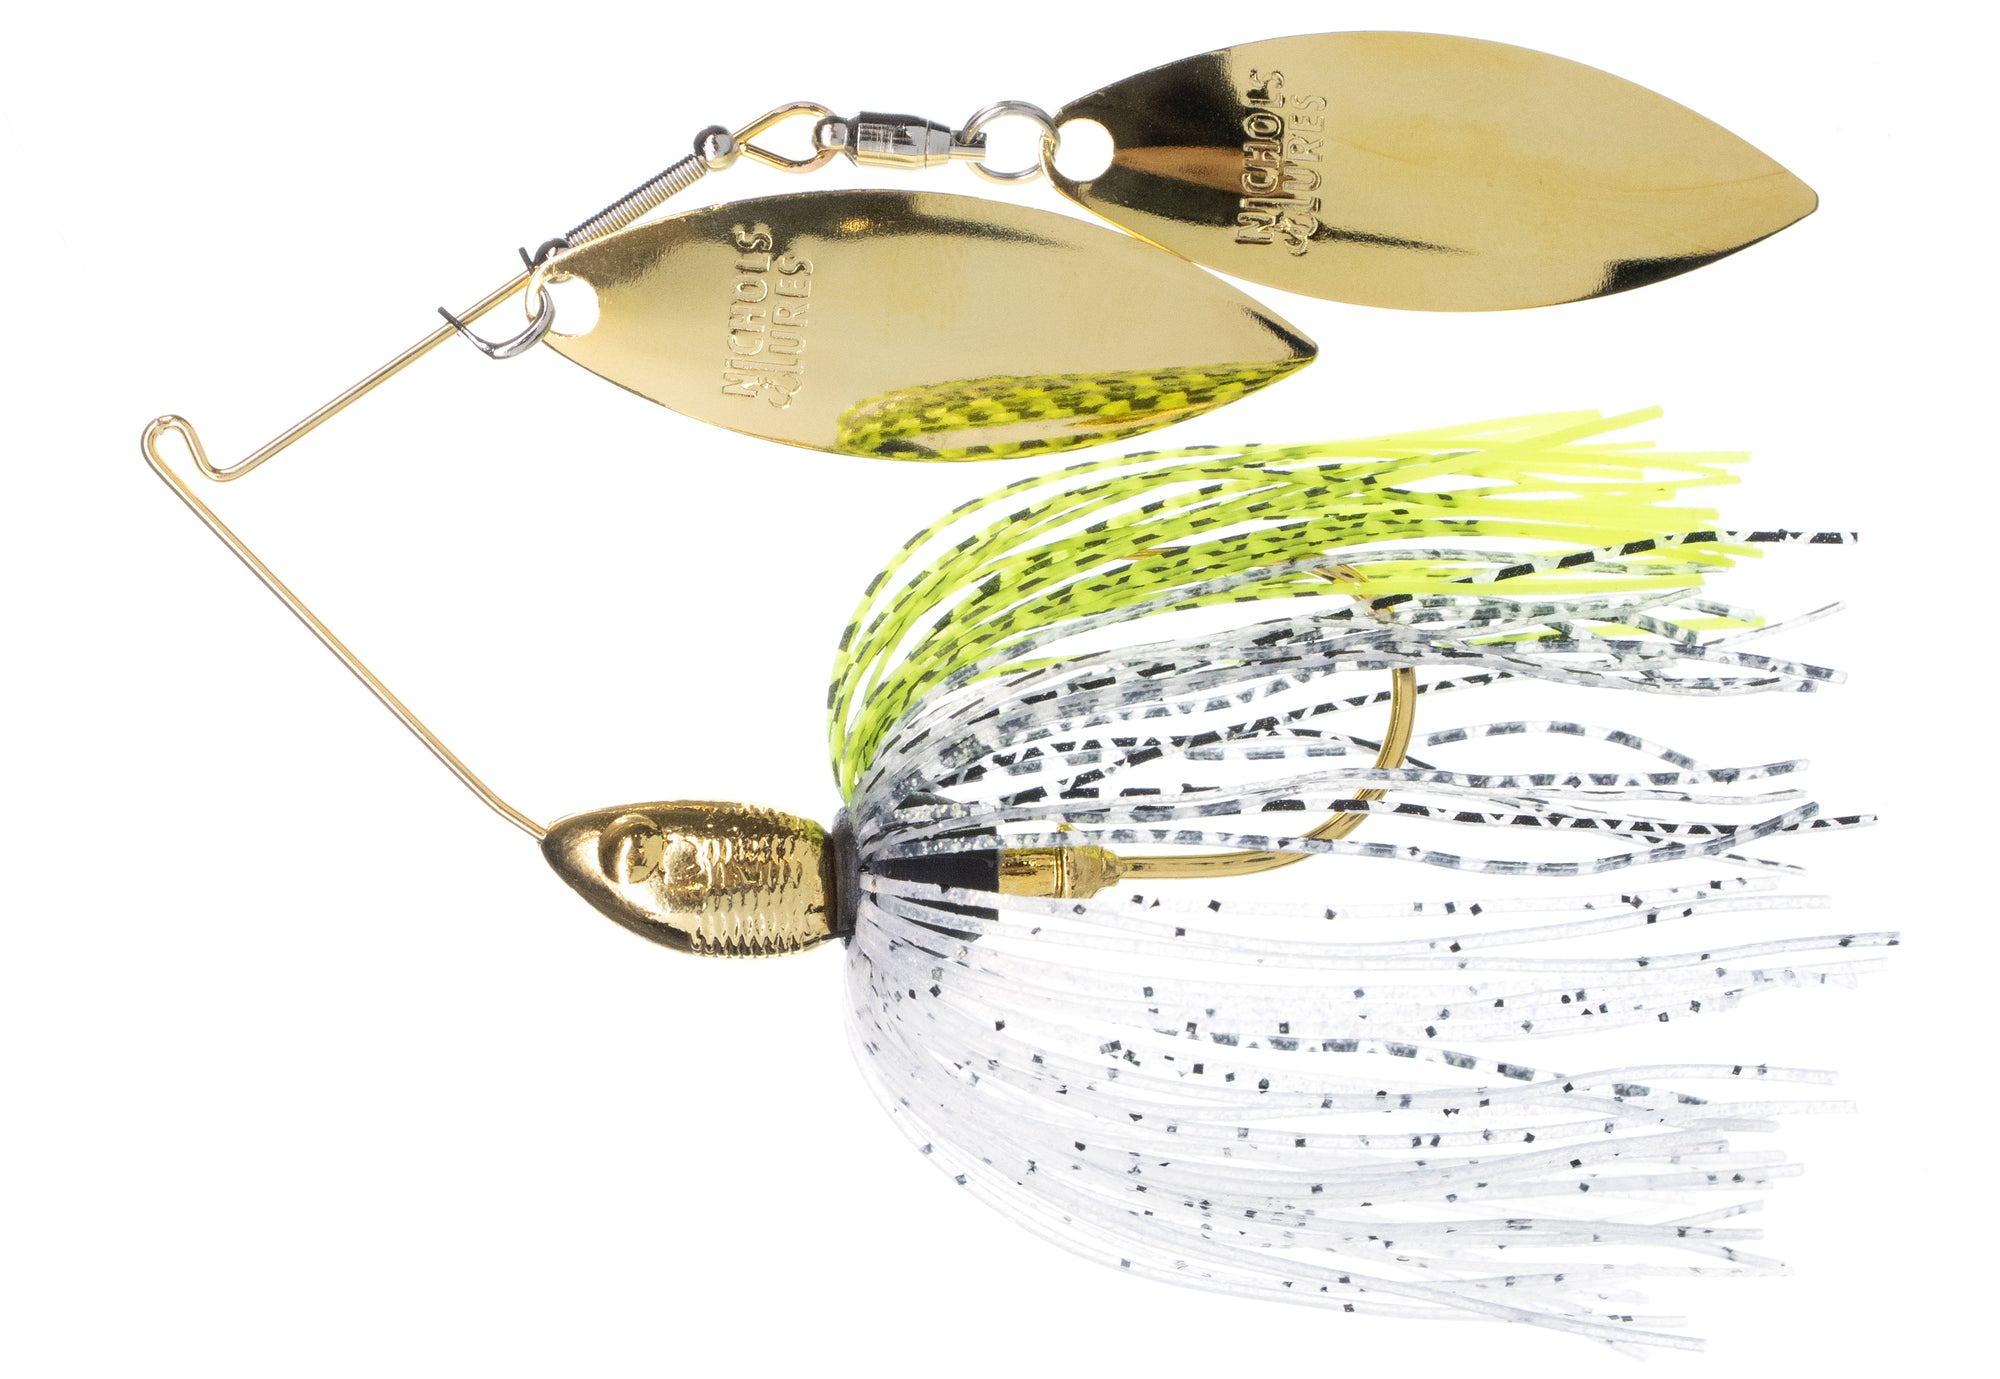 Nichols Lures - the premier bass fishing lure manufacturing company